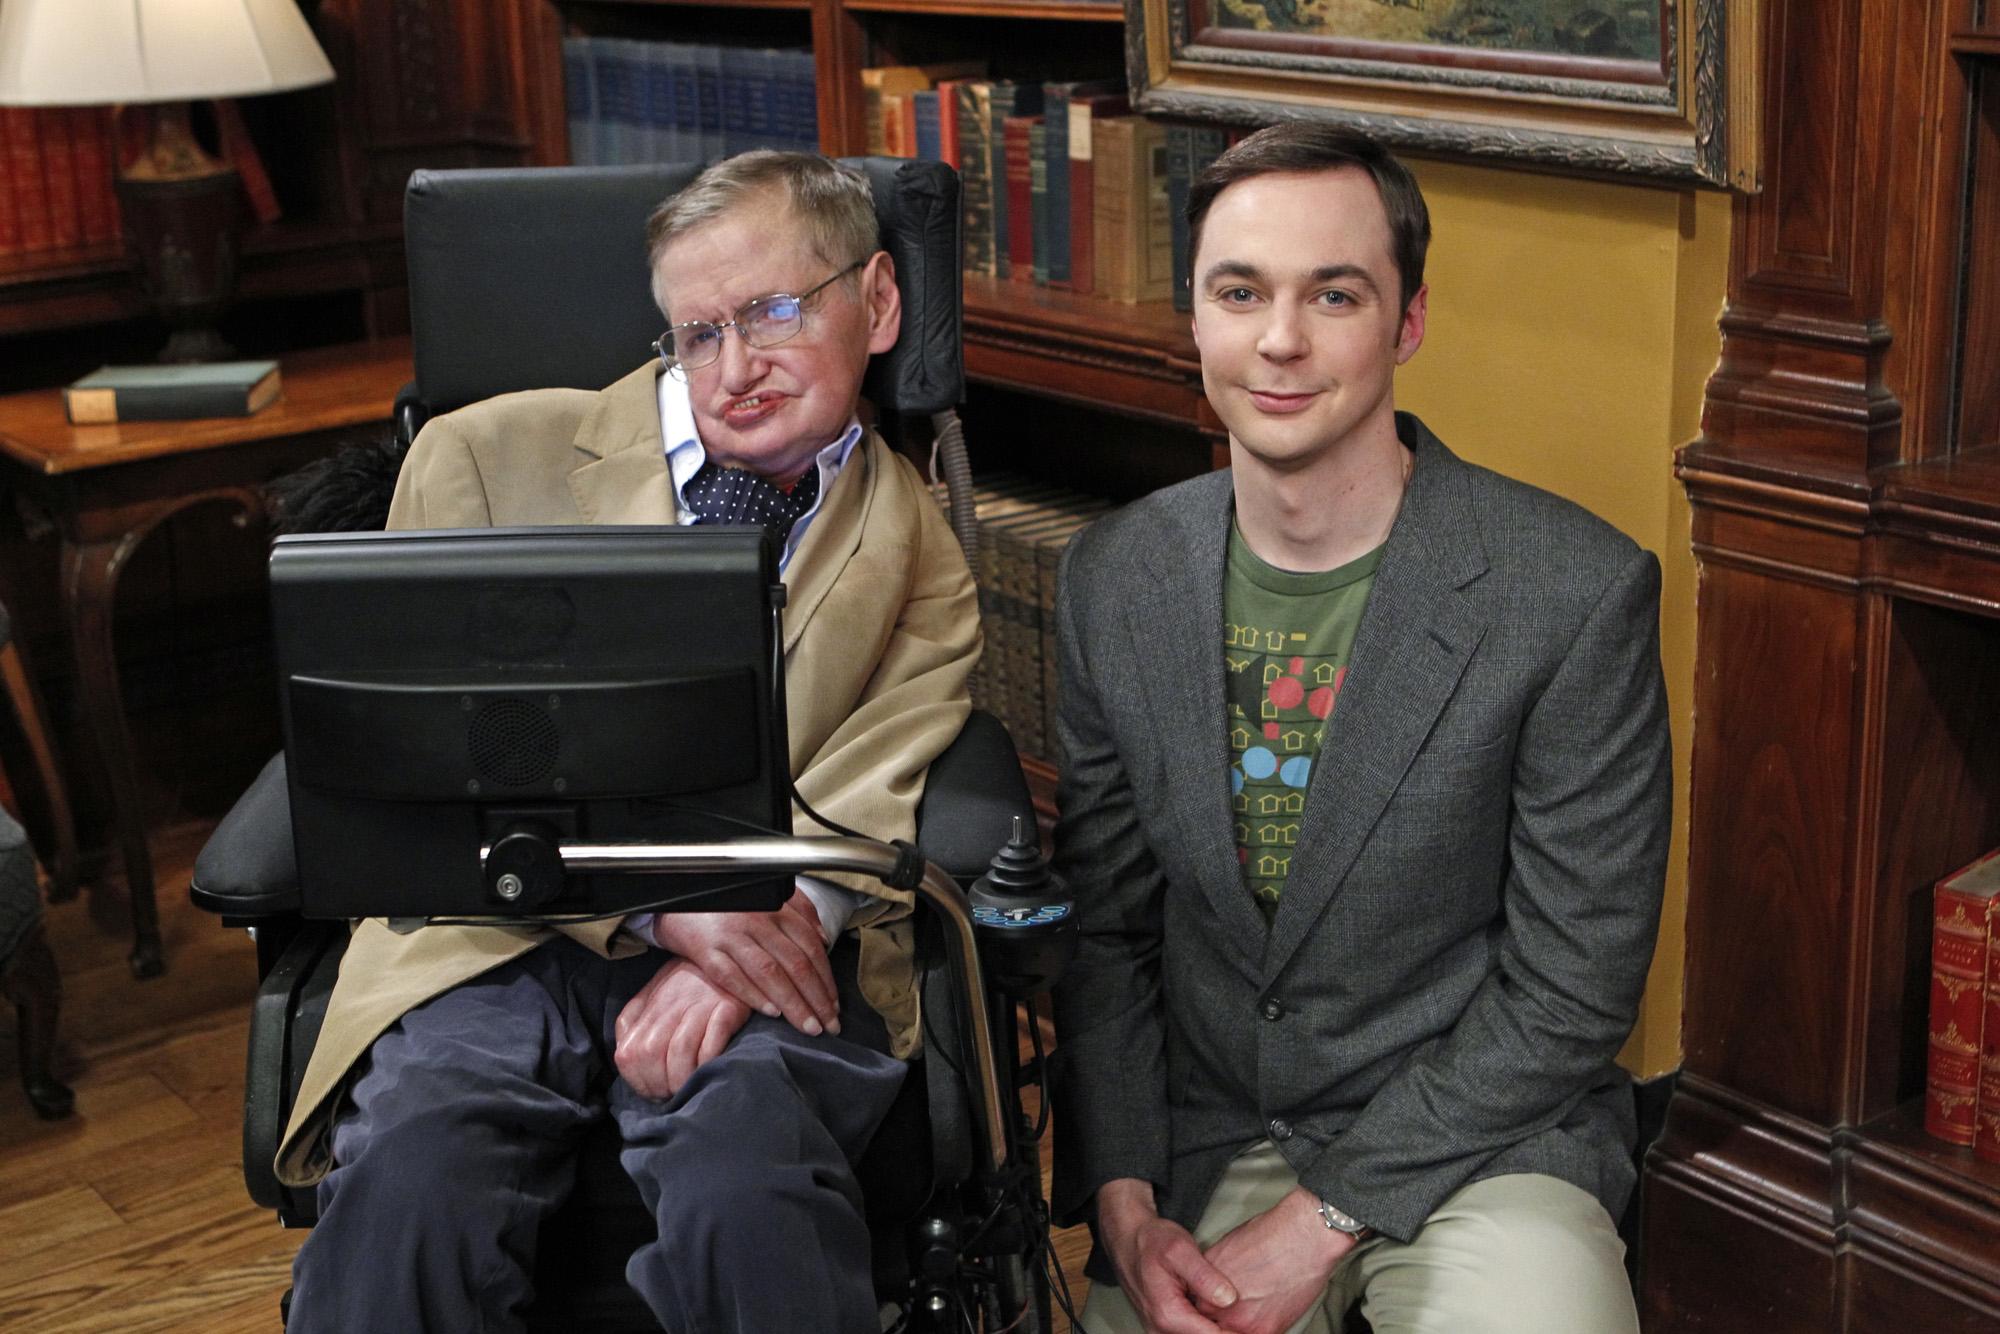 Stephen Hawking guest stars on The Big Bang Theory with Jim Parsons